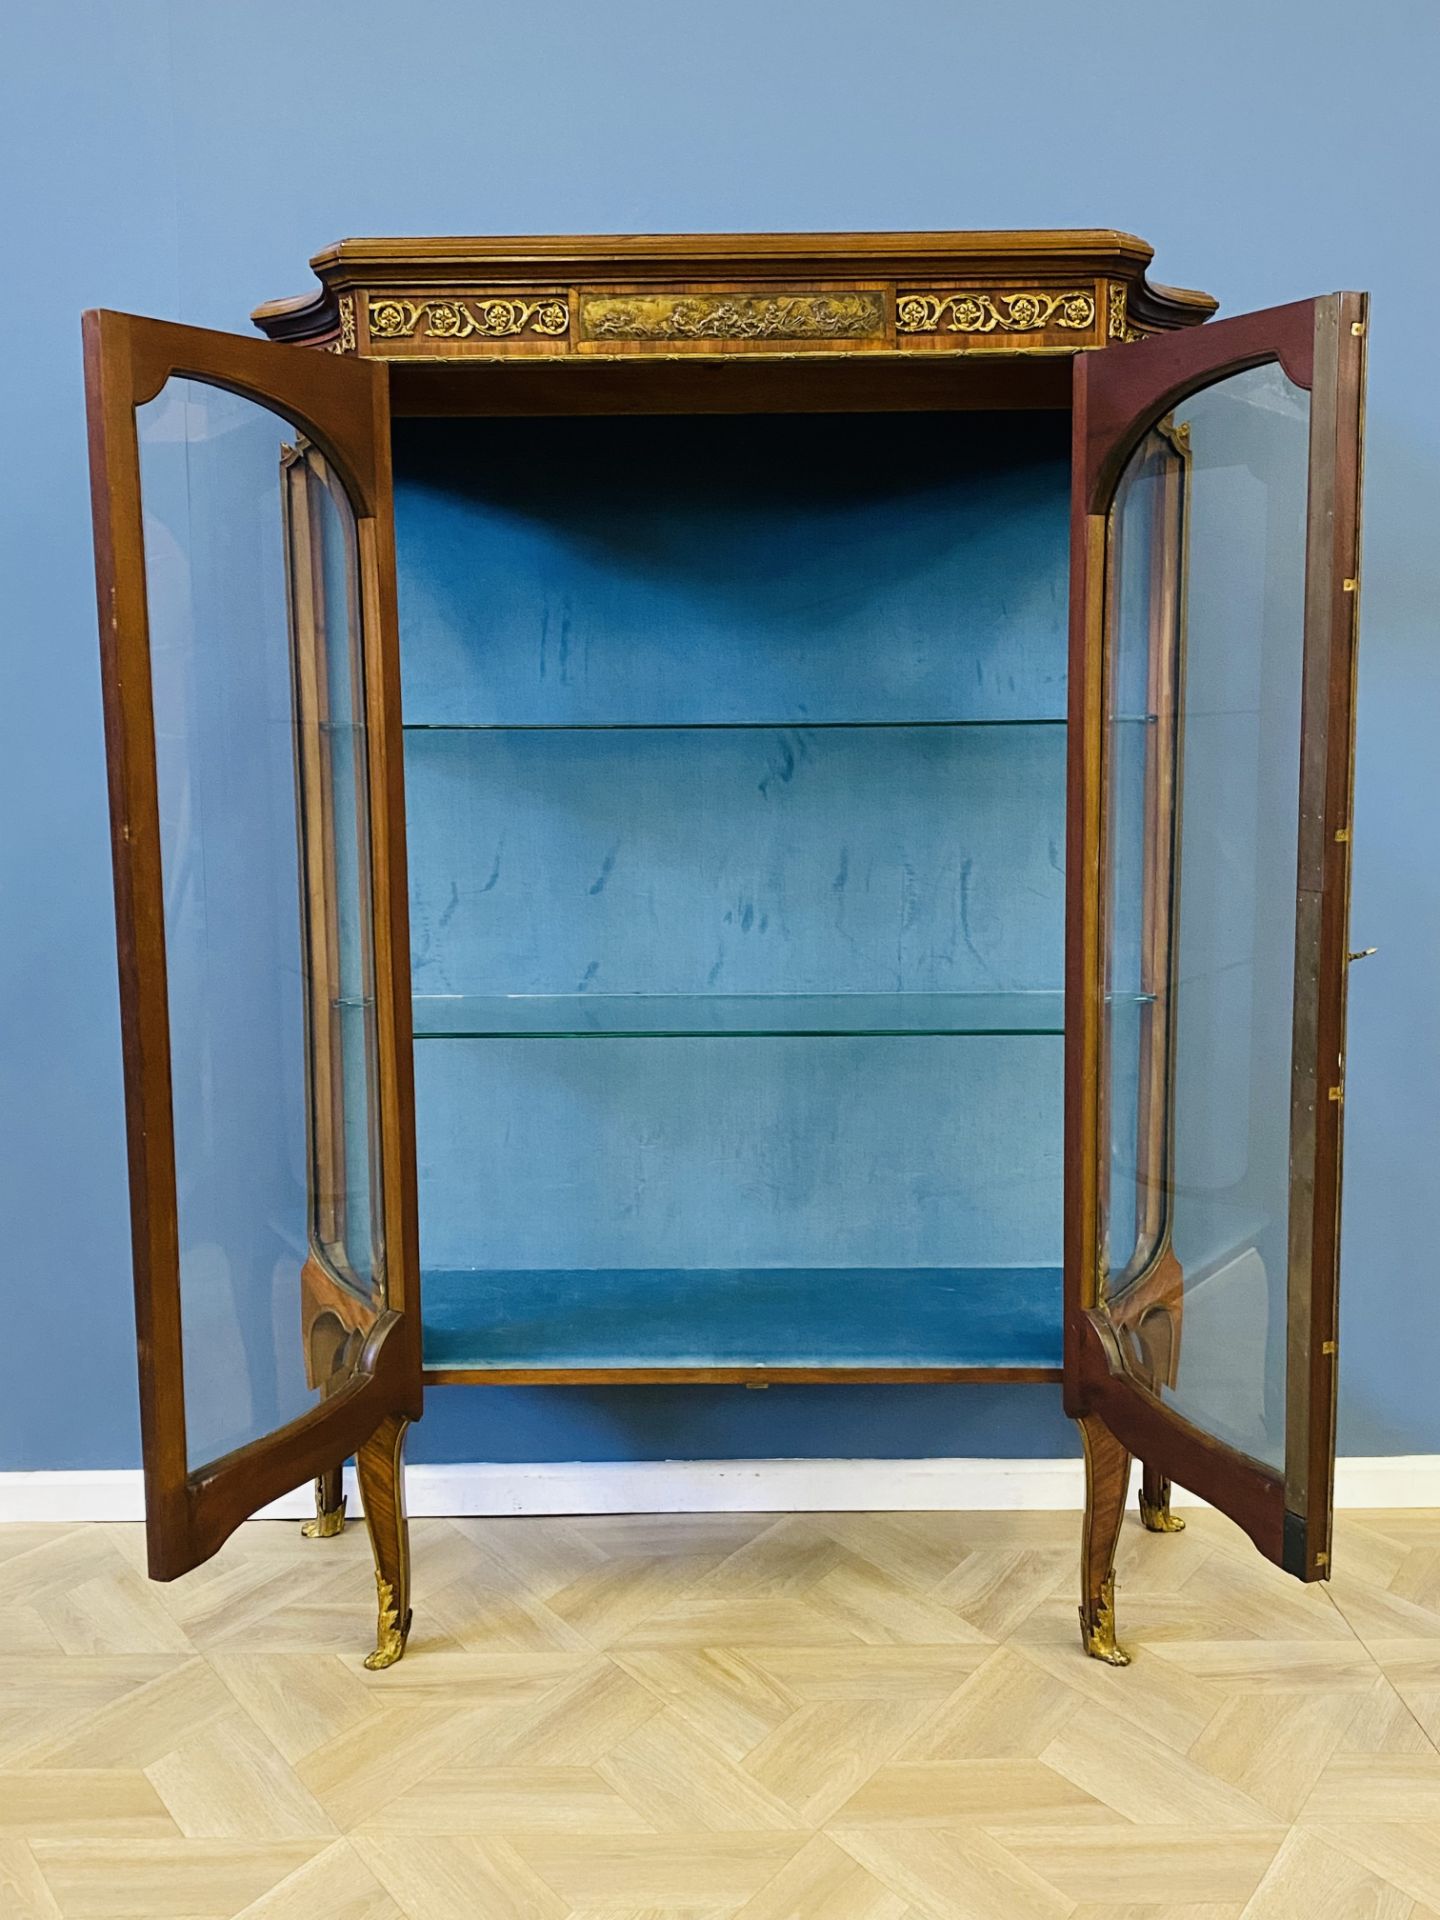 Late 19th century French kingwood and ormolu mounted two door vitrine - Image 6 of 7